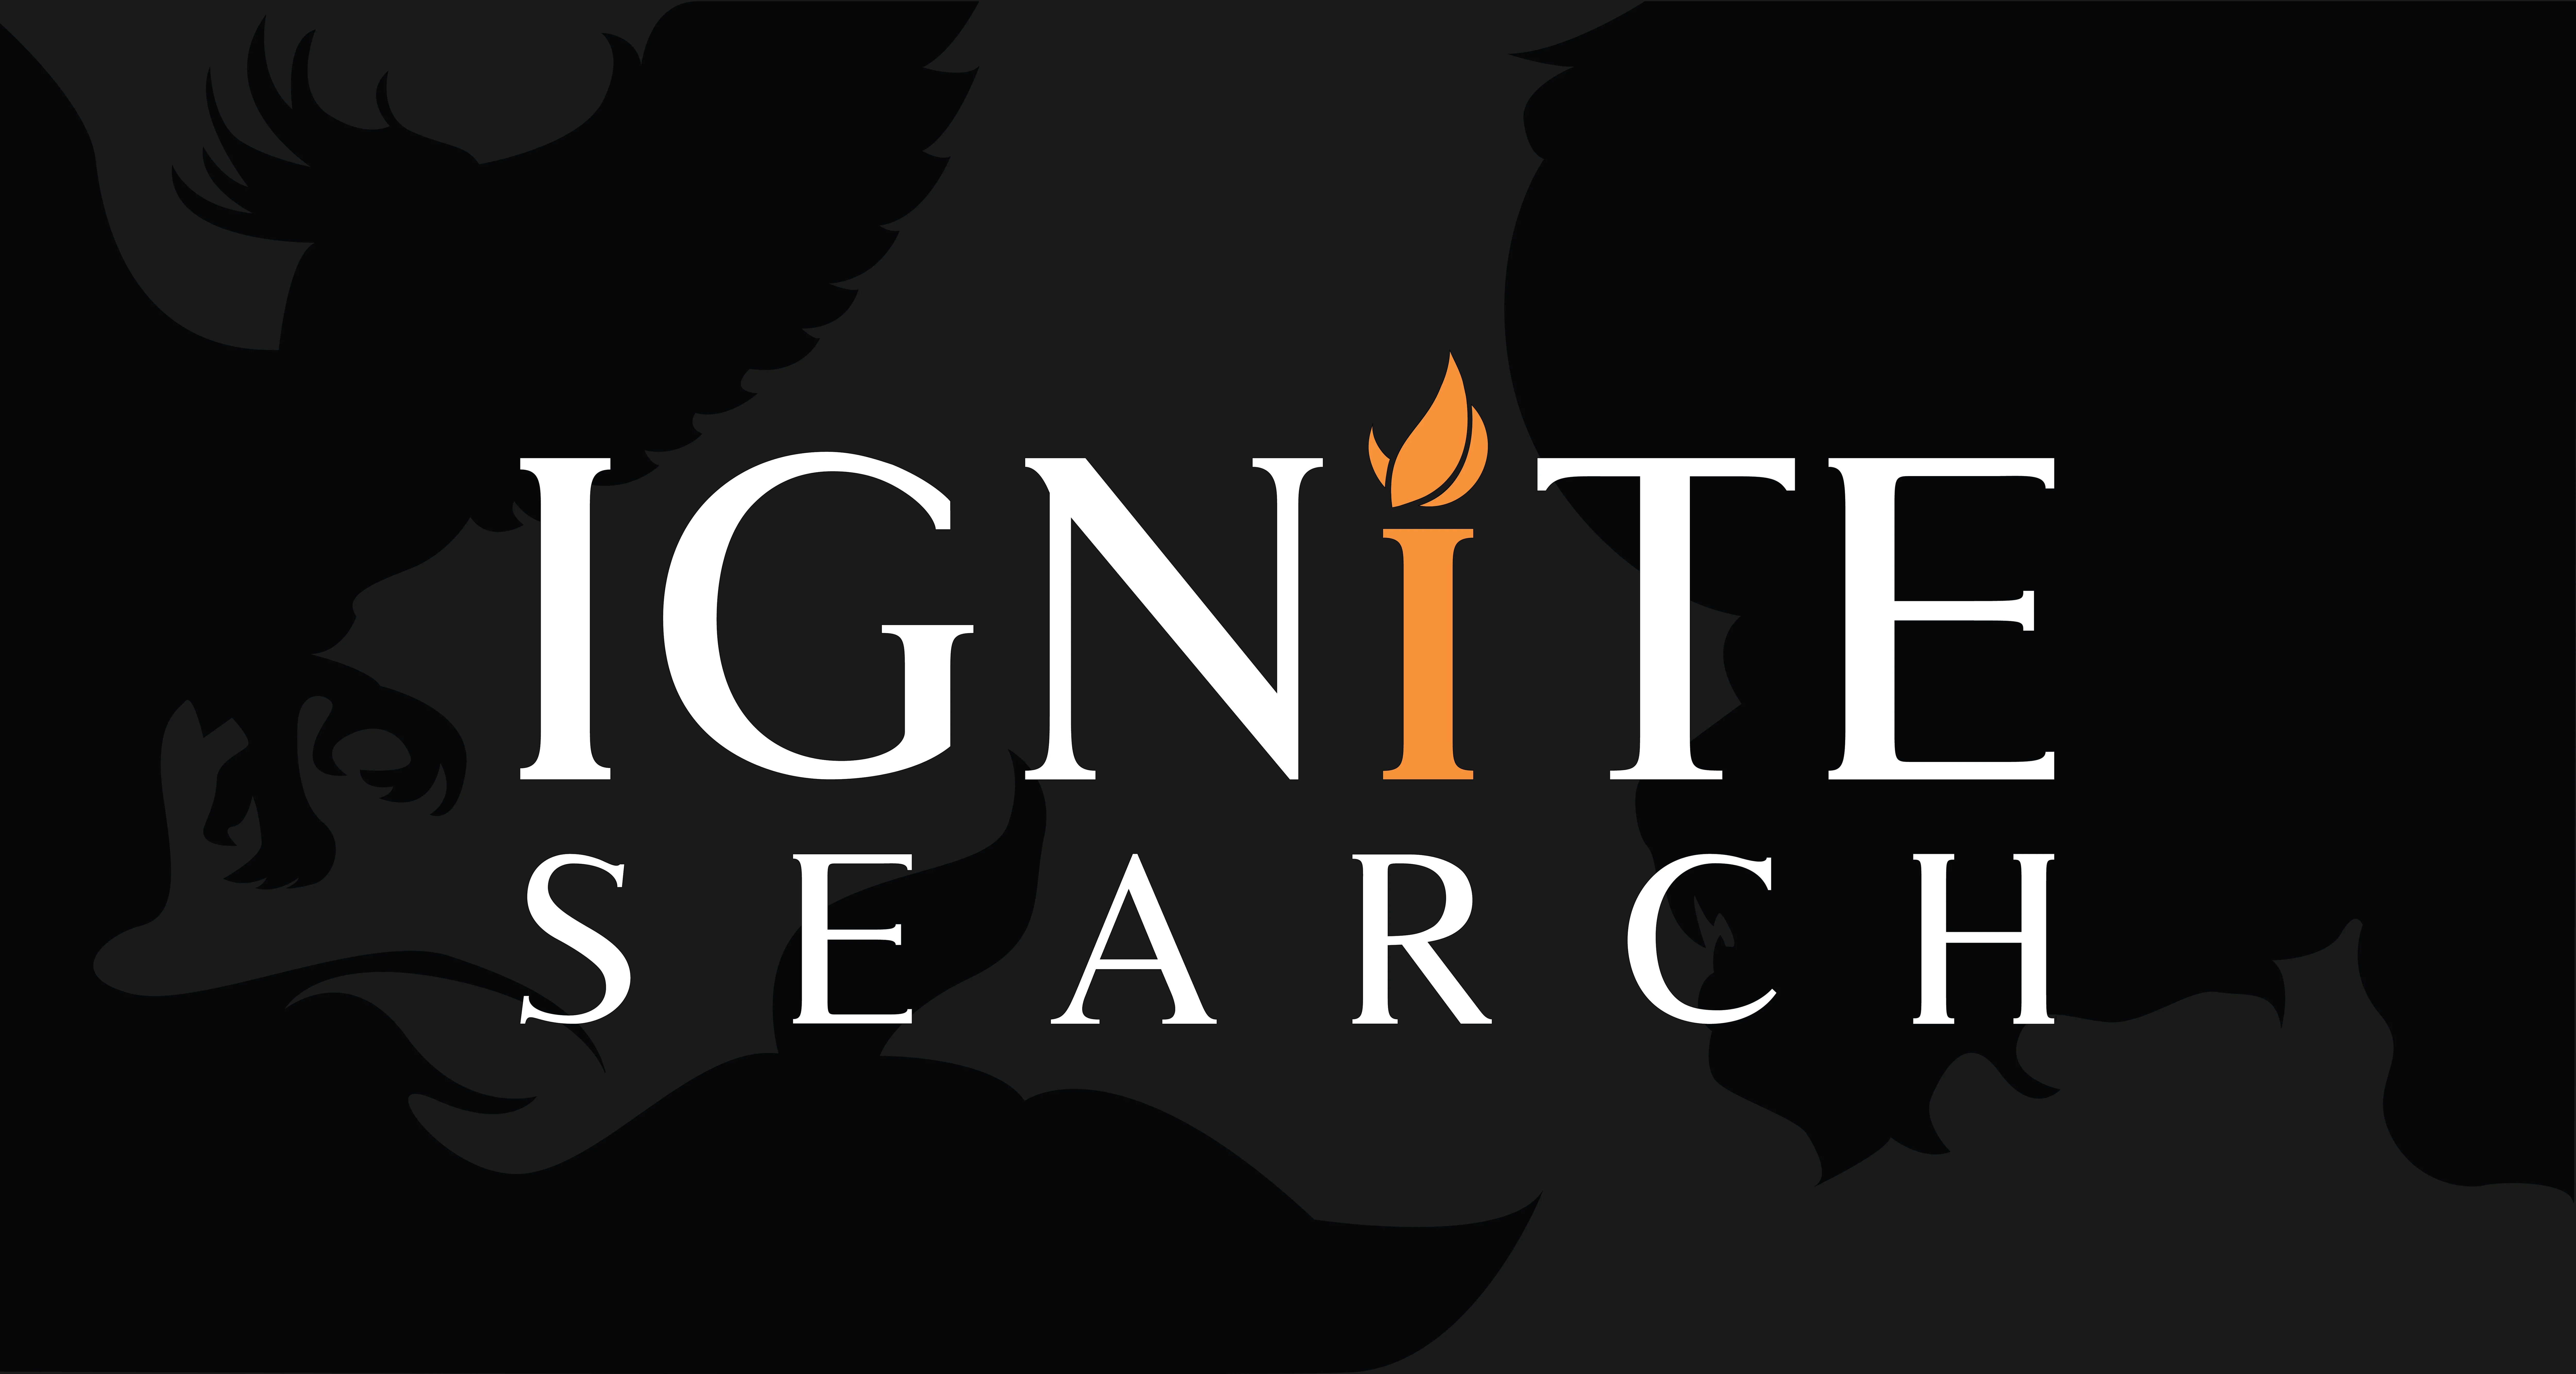 Ignite Search Jaw Dropping Office Mural Wall Blog Feature Image